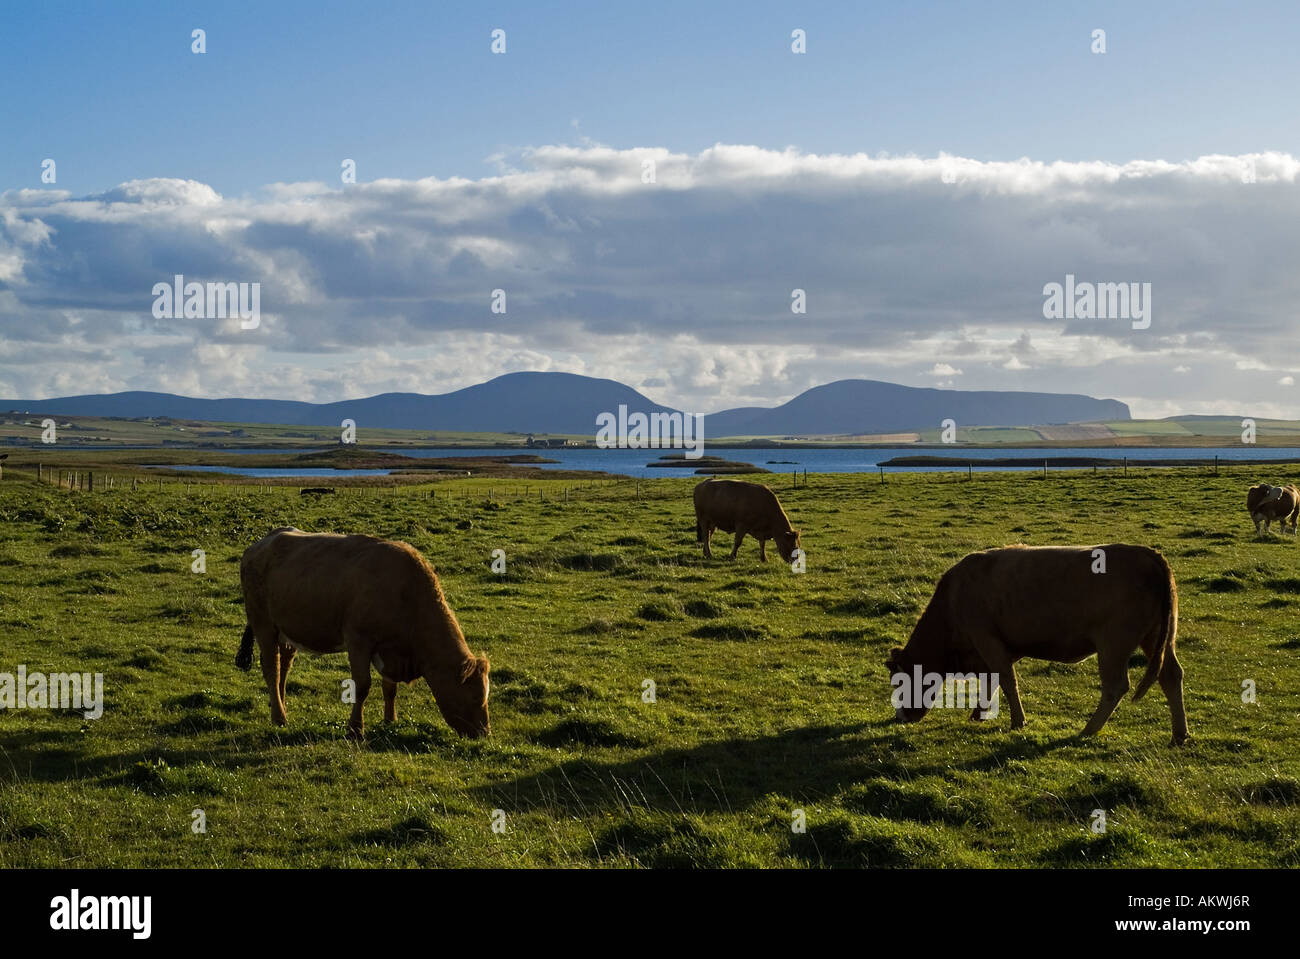 dh Cows FARMING ORKNEY Cows grazing in field Loch Harray Stock Photo